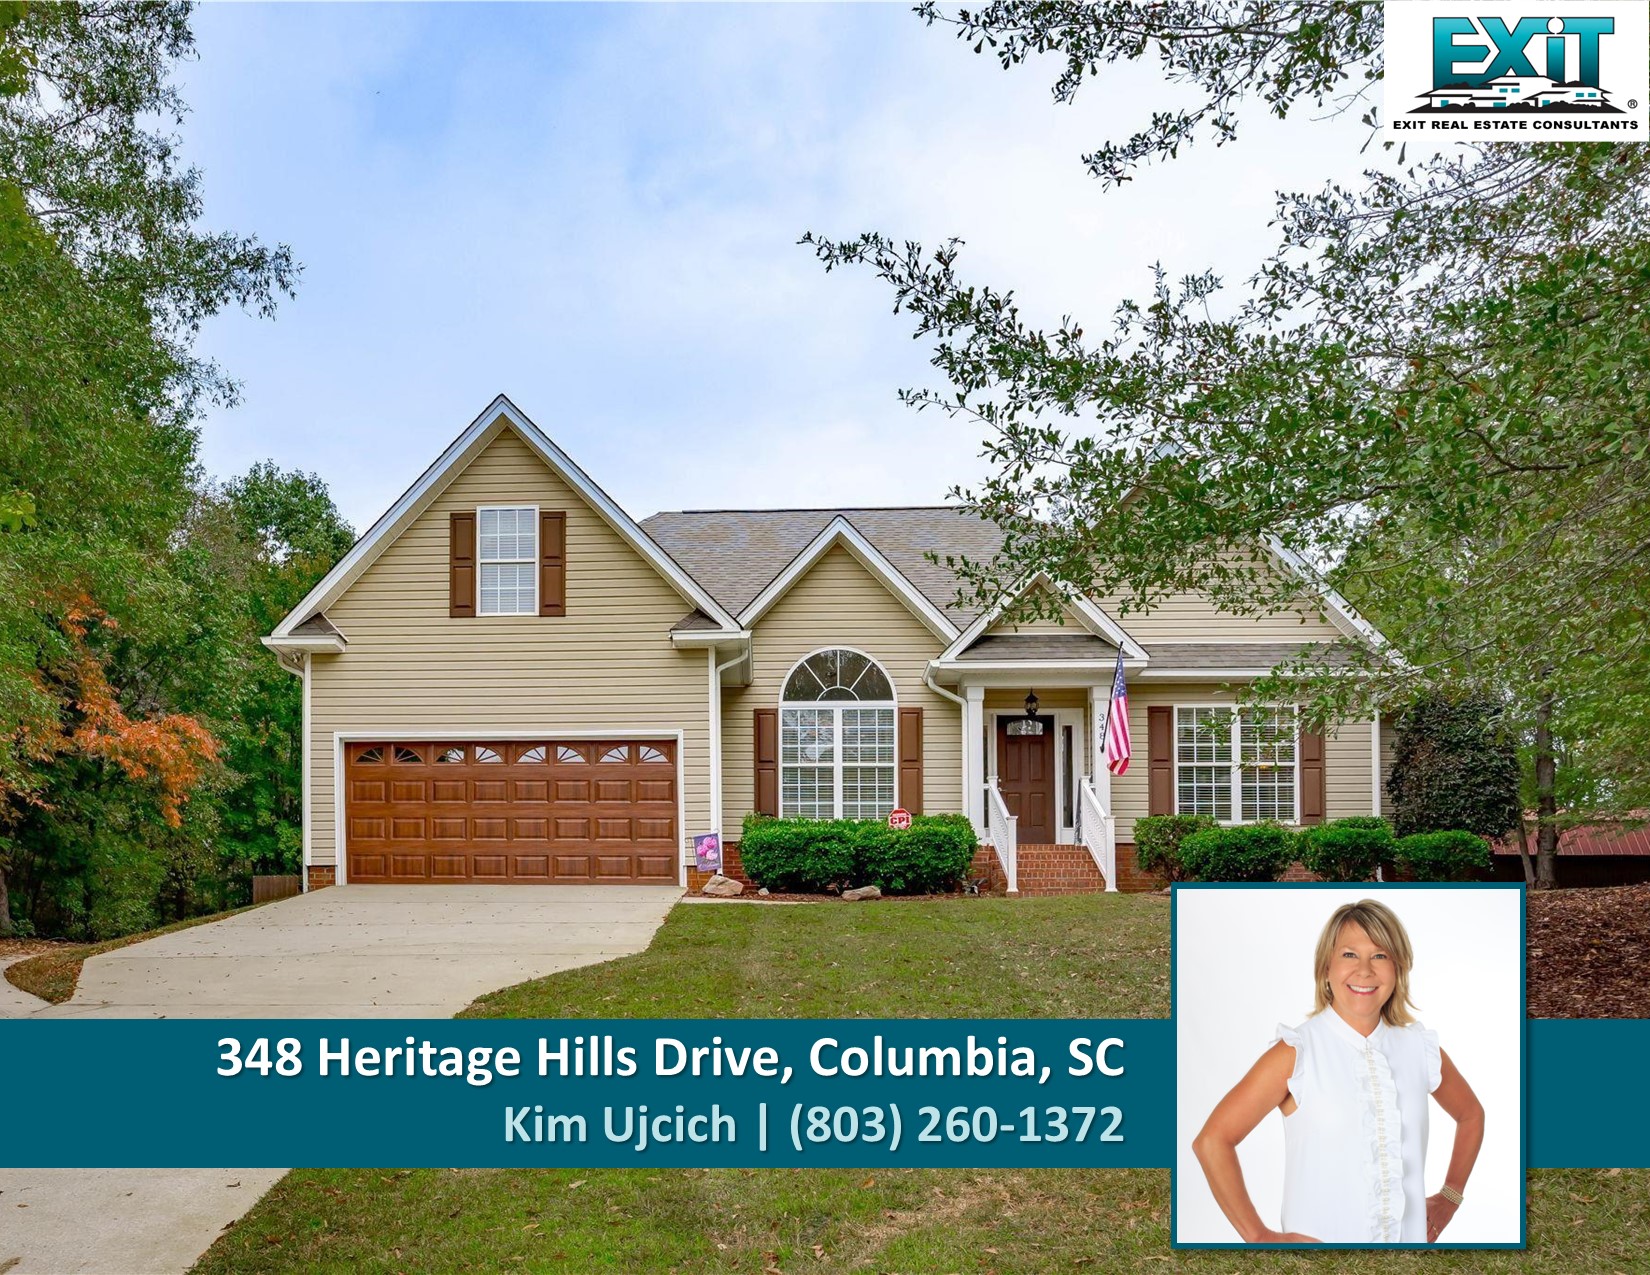 Just listed in Heritage Hills - Columbia